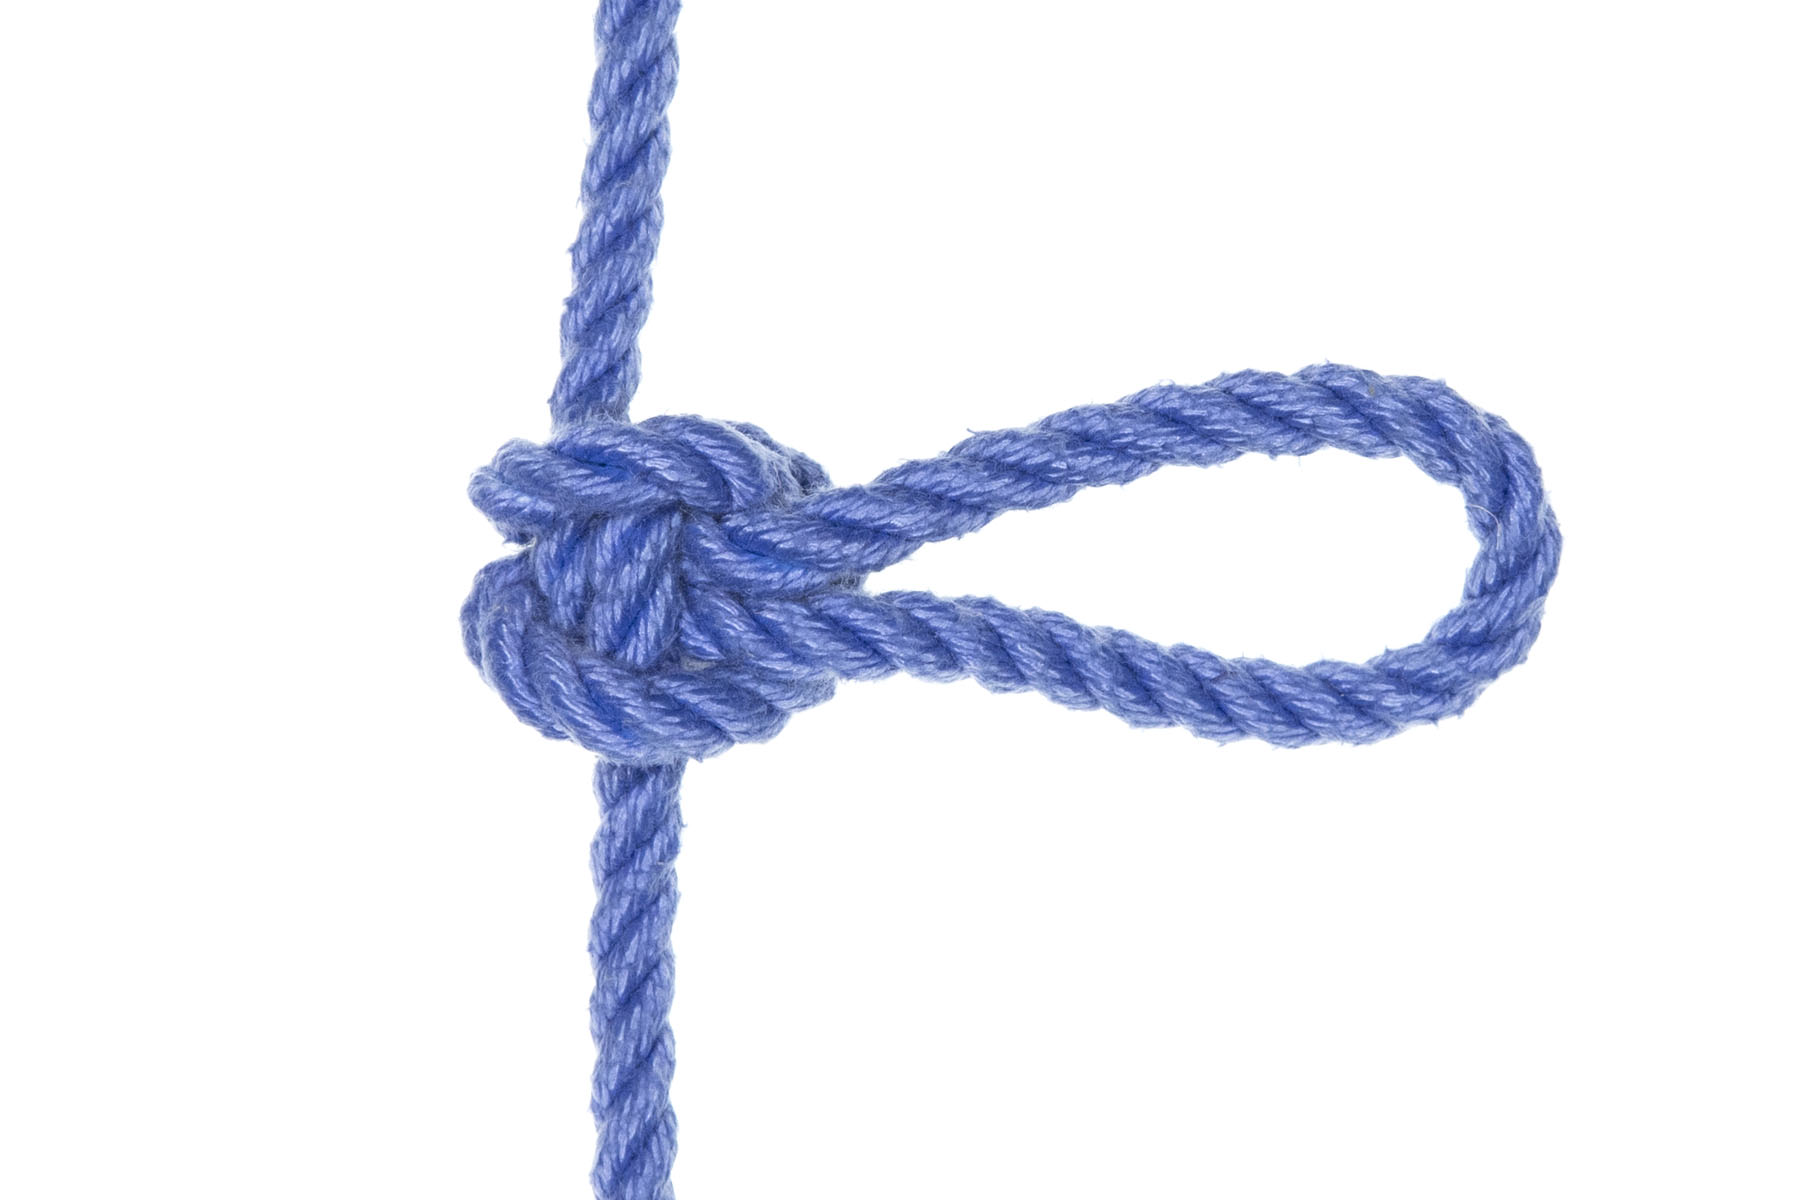 A completed alpine butterfly knot. A vertical line crosses the middle of the frame. There is a compact knot in the middle of the frame and a three inch bight extends out to the right.